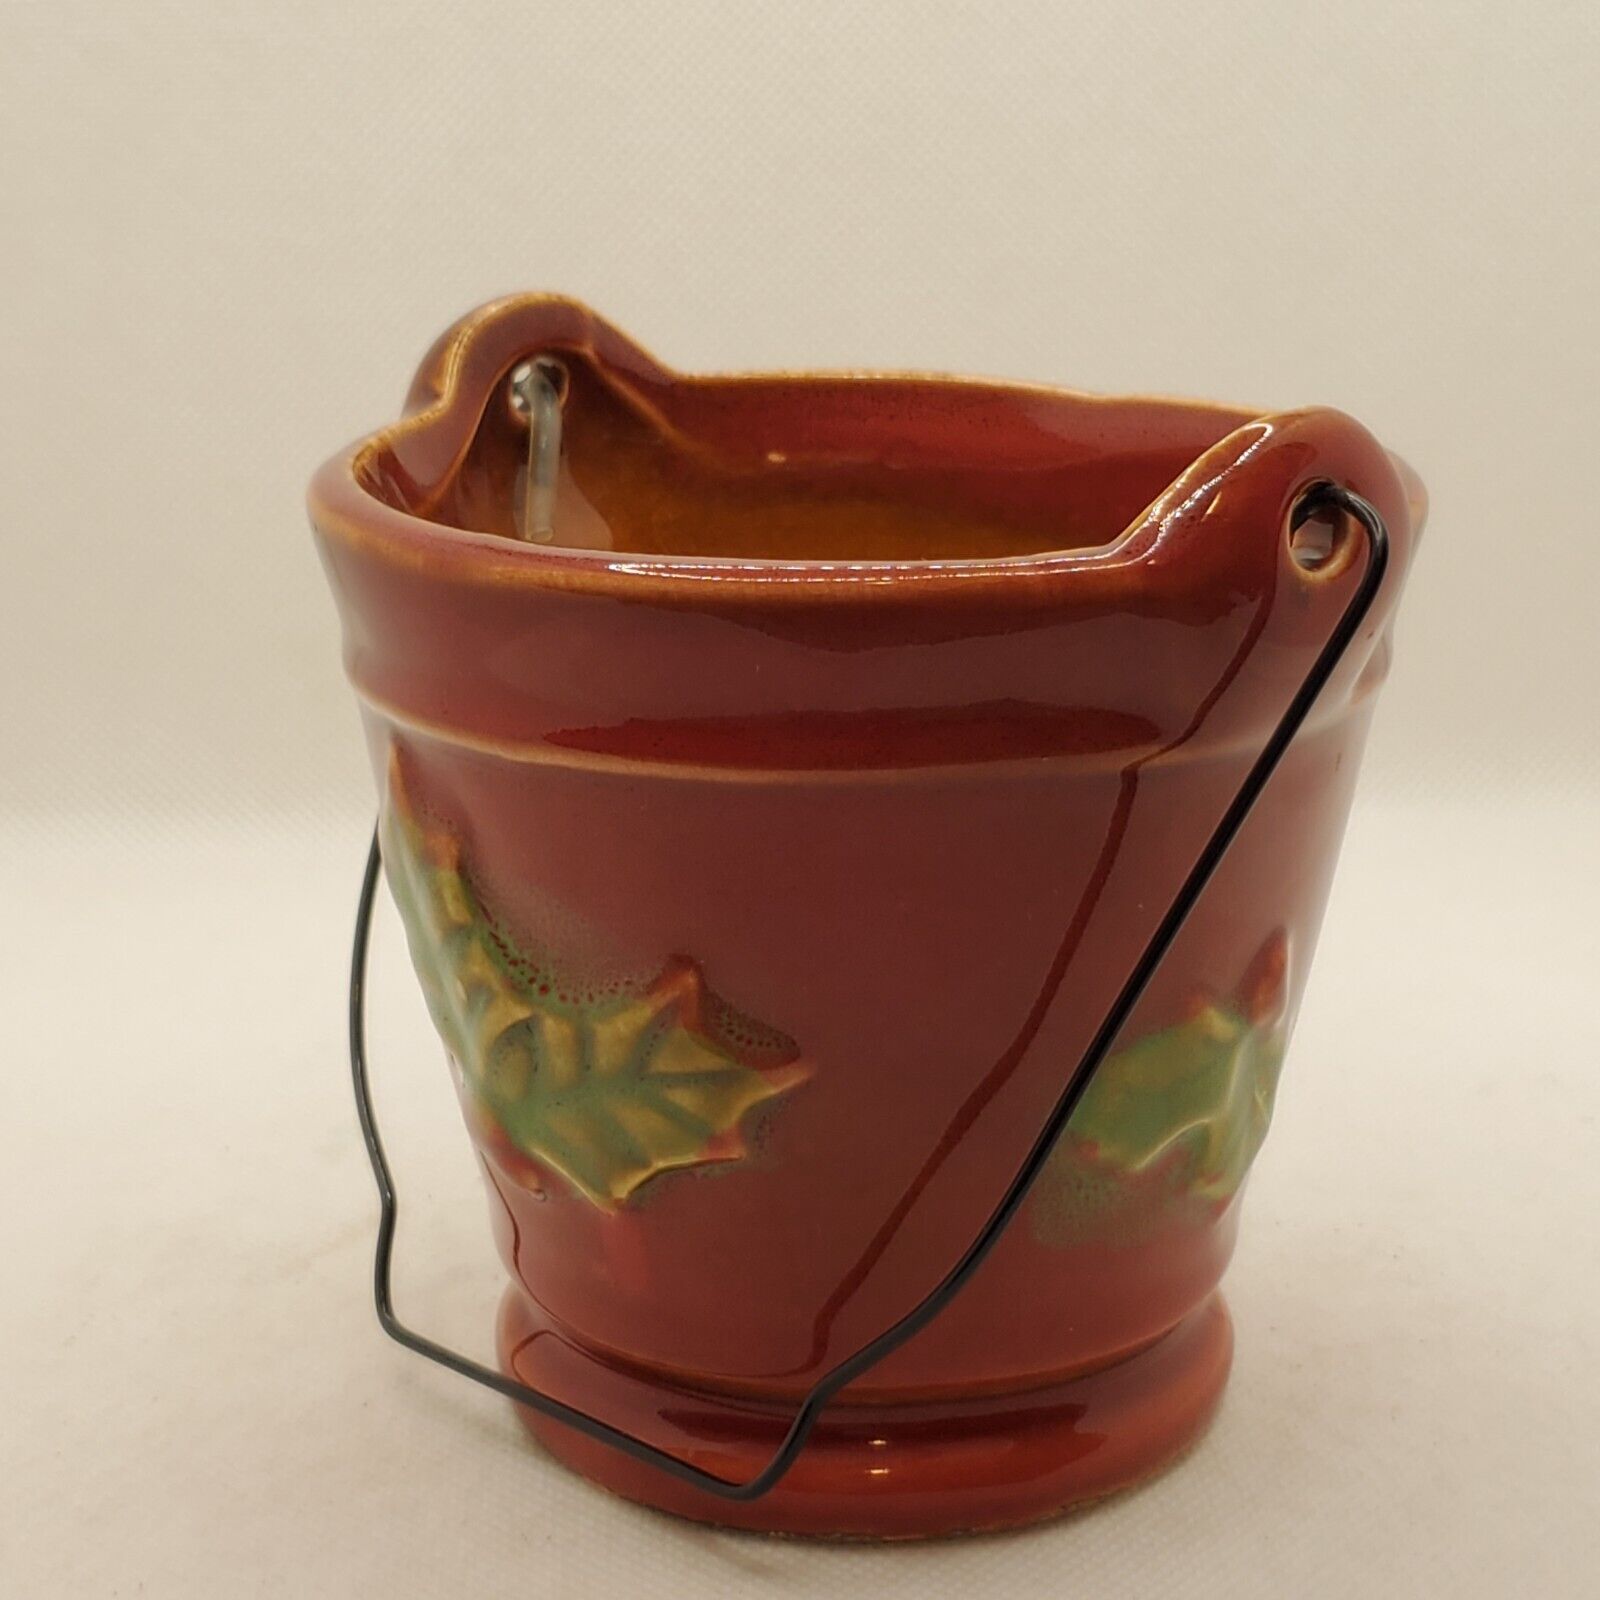 Small Decorative Holiday Ceramic Pot with Handle and Holly Berries 4\